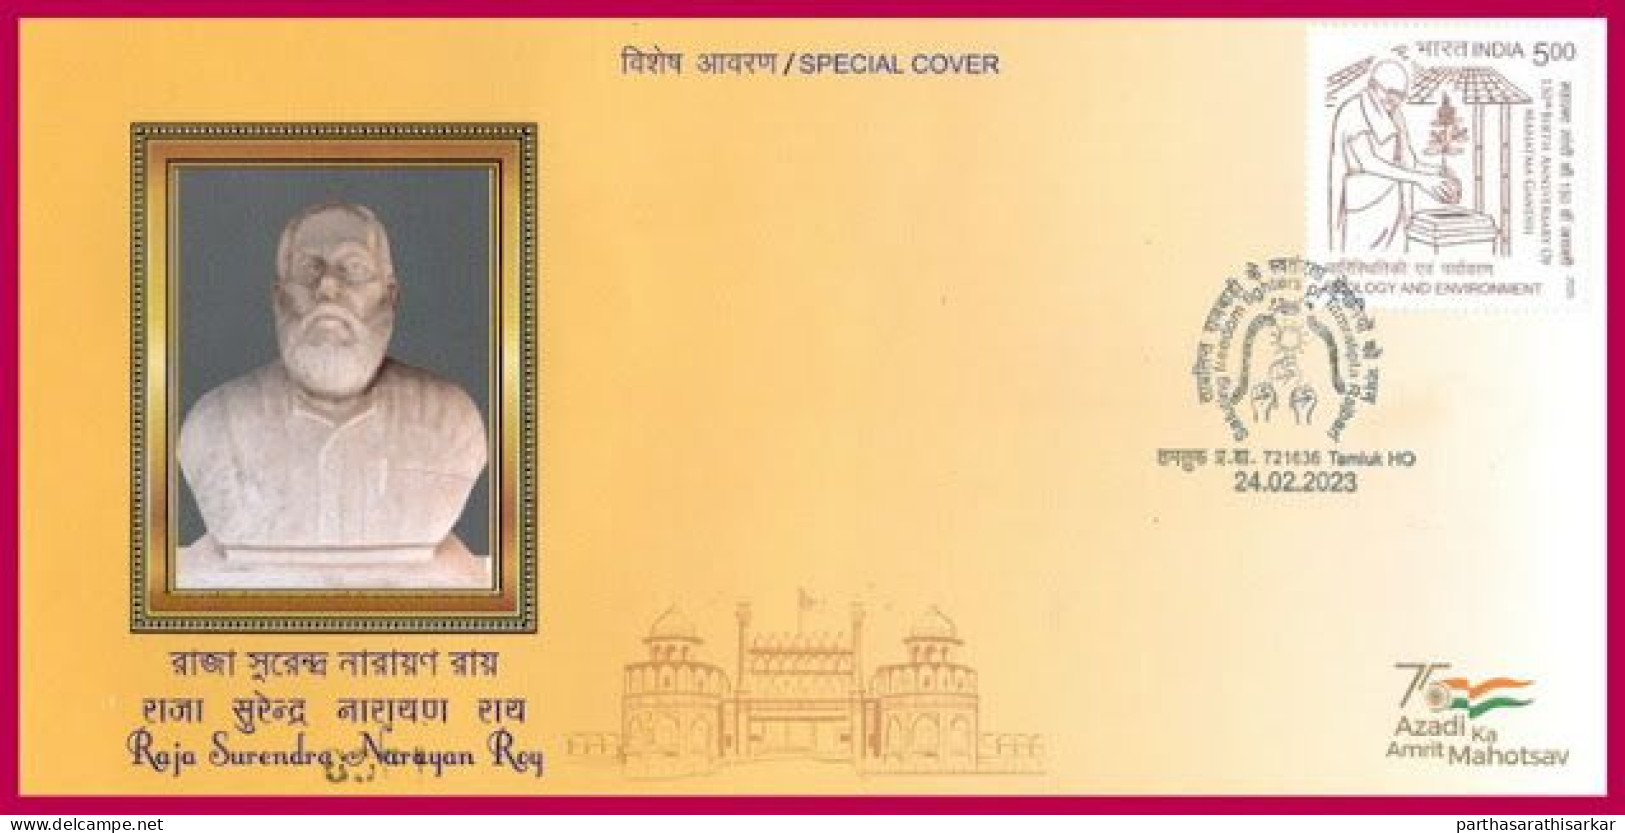 INDIA 2023 RAJA SURENDRA NARAYAN ROY FREEDOM FIGHTER SPECIAL COVER ISSUED BY INDIA POST USED RARE - Briefe U. Dokumente